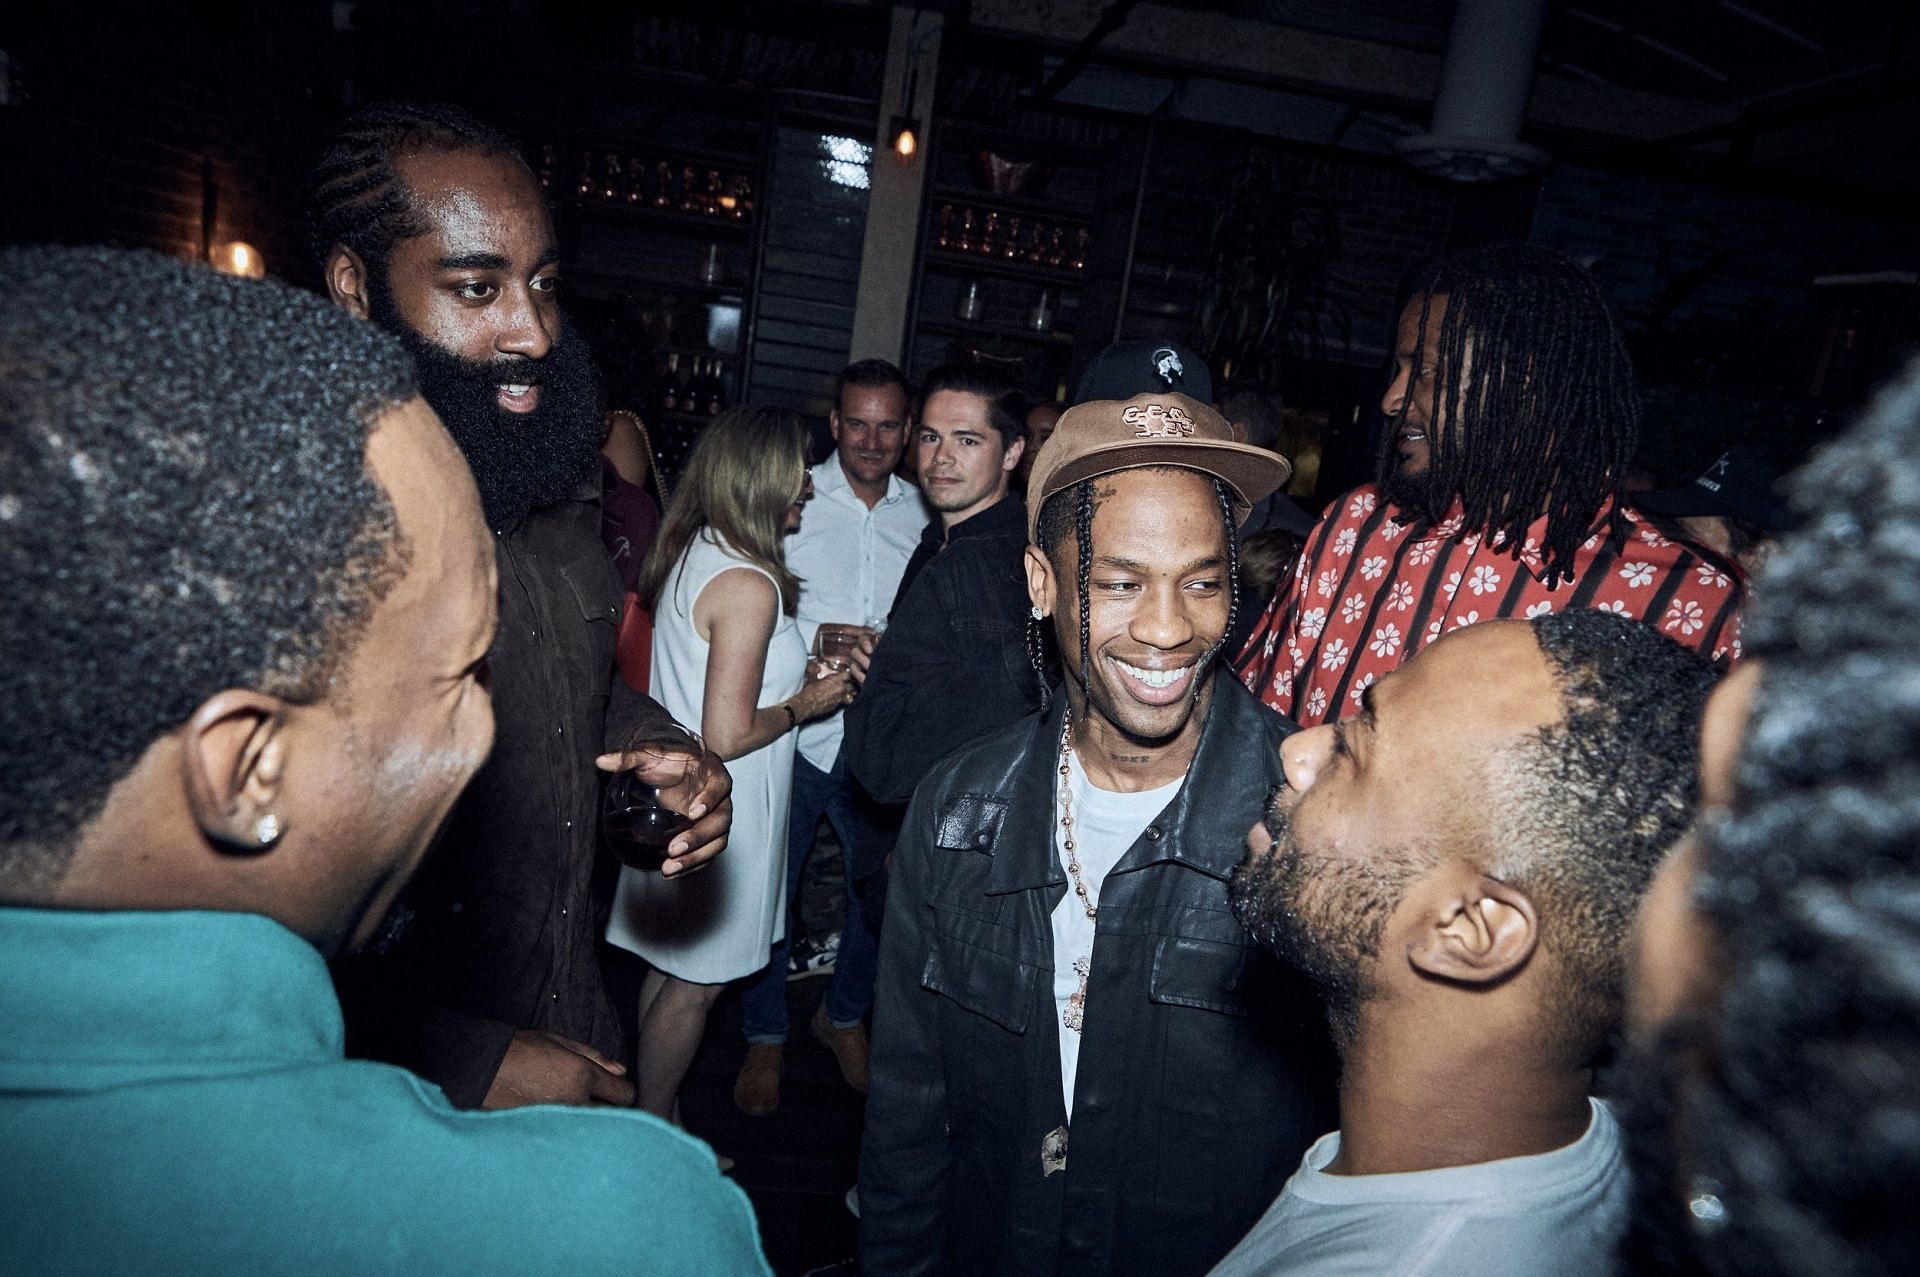 James Harden spent the night partying after losing big to the Brooklyn Nets in March. [photo: ATC]